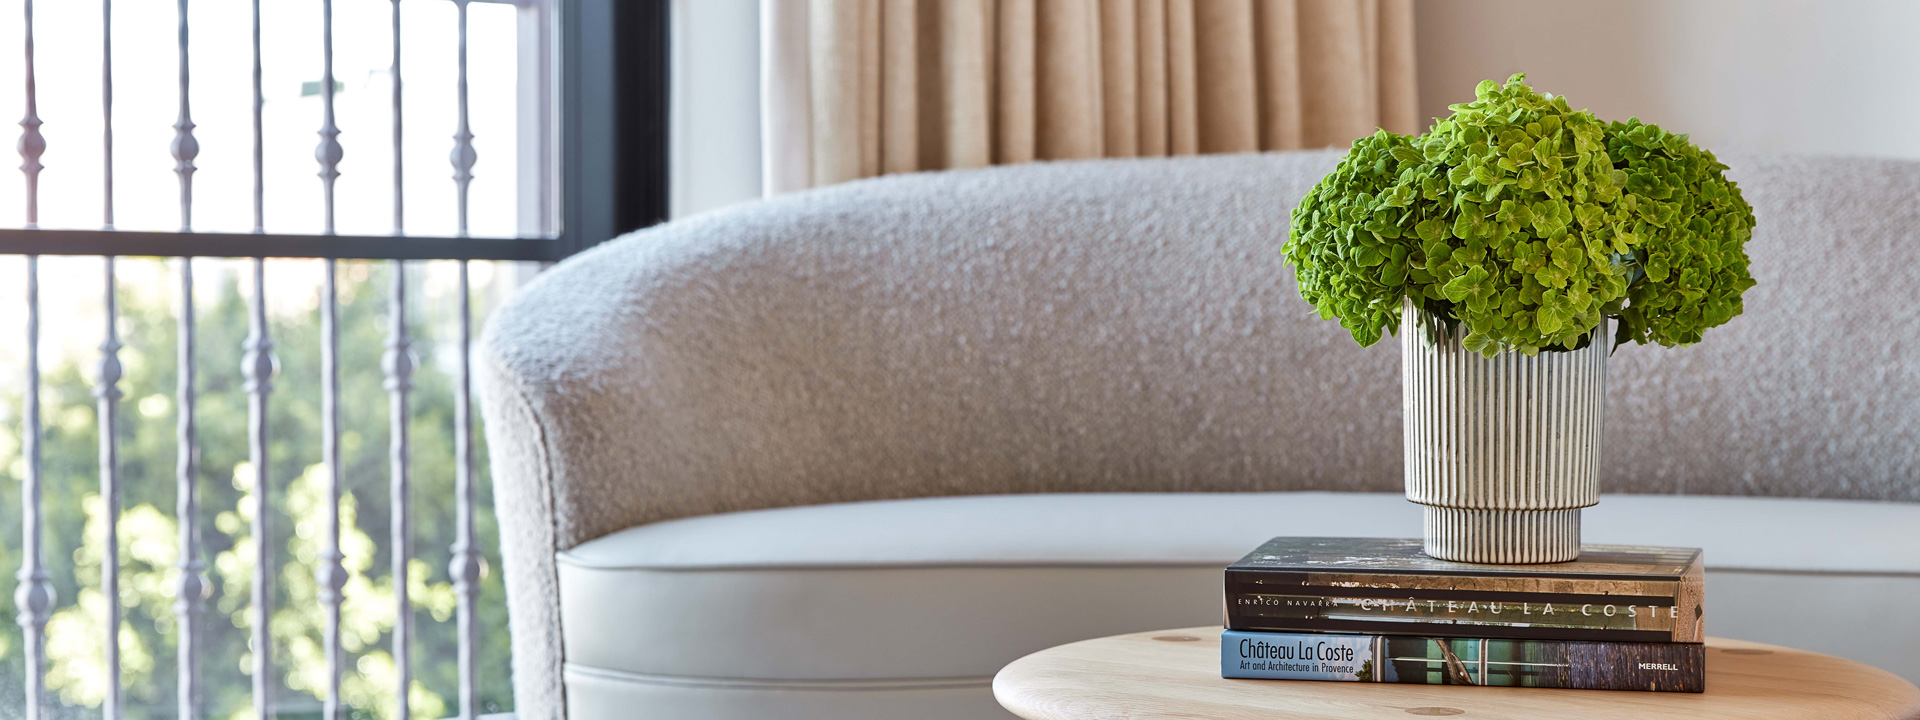 A curved ivory couch and a small wooden table. On the table is a vase of green hydrangeas sitting on top of two books.